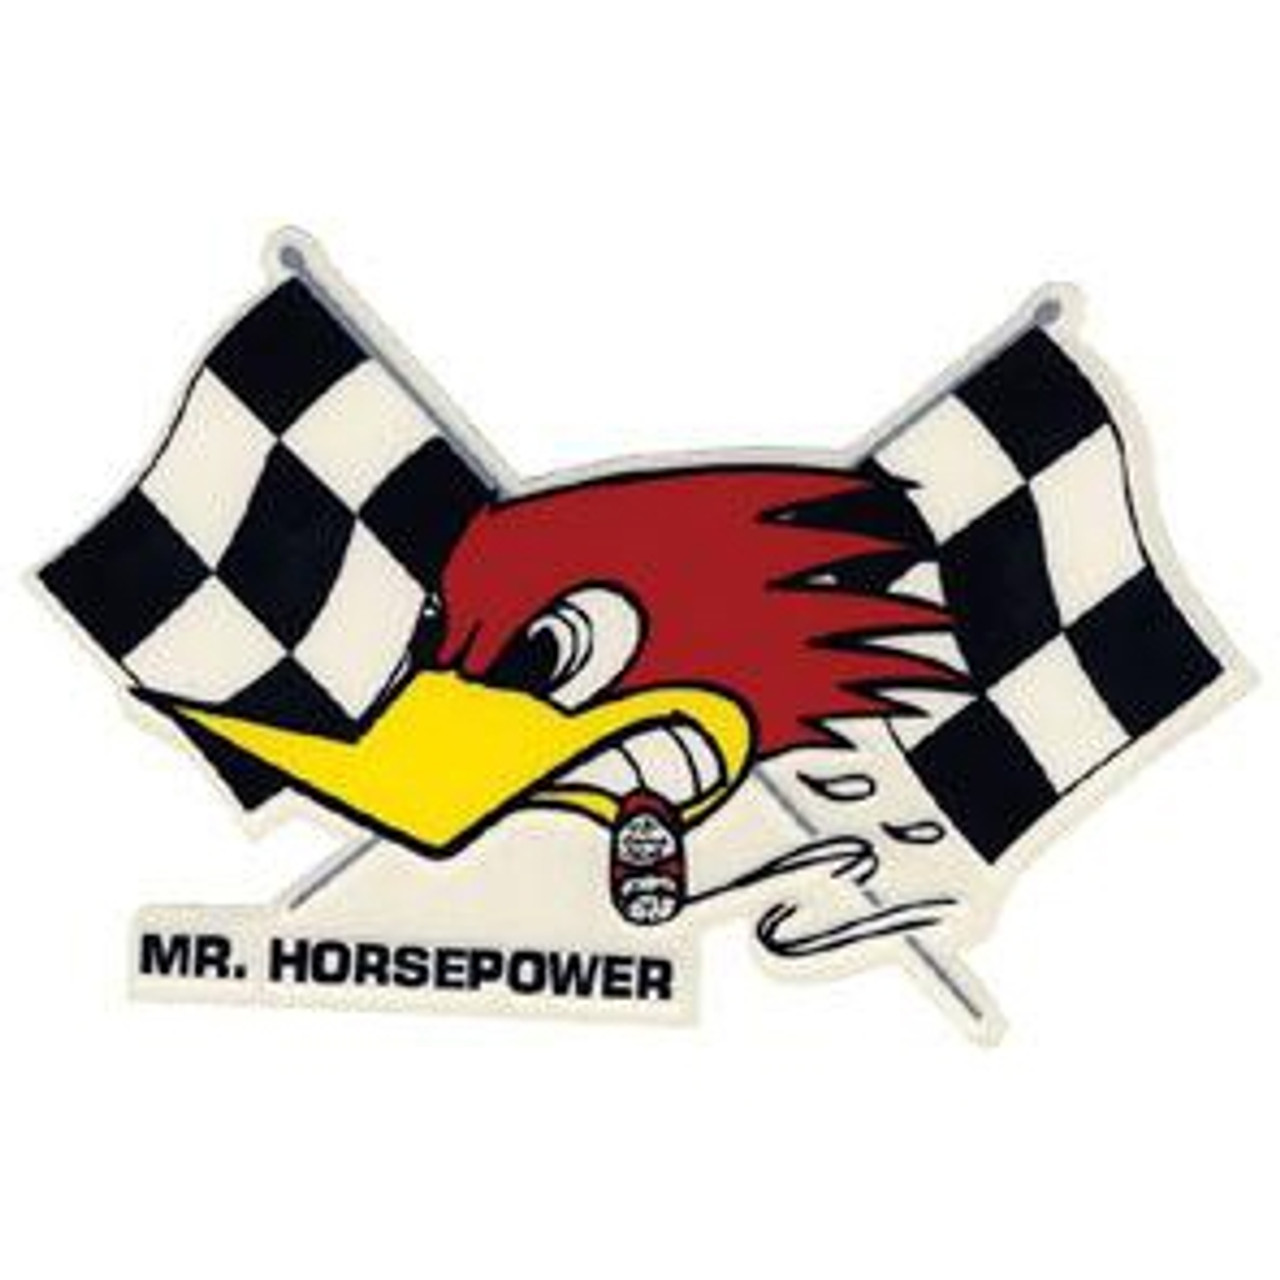 Clay Smith Cams Mr. Horsepower with Flags Decal